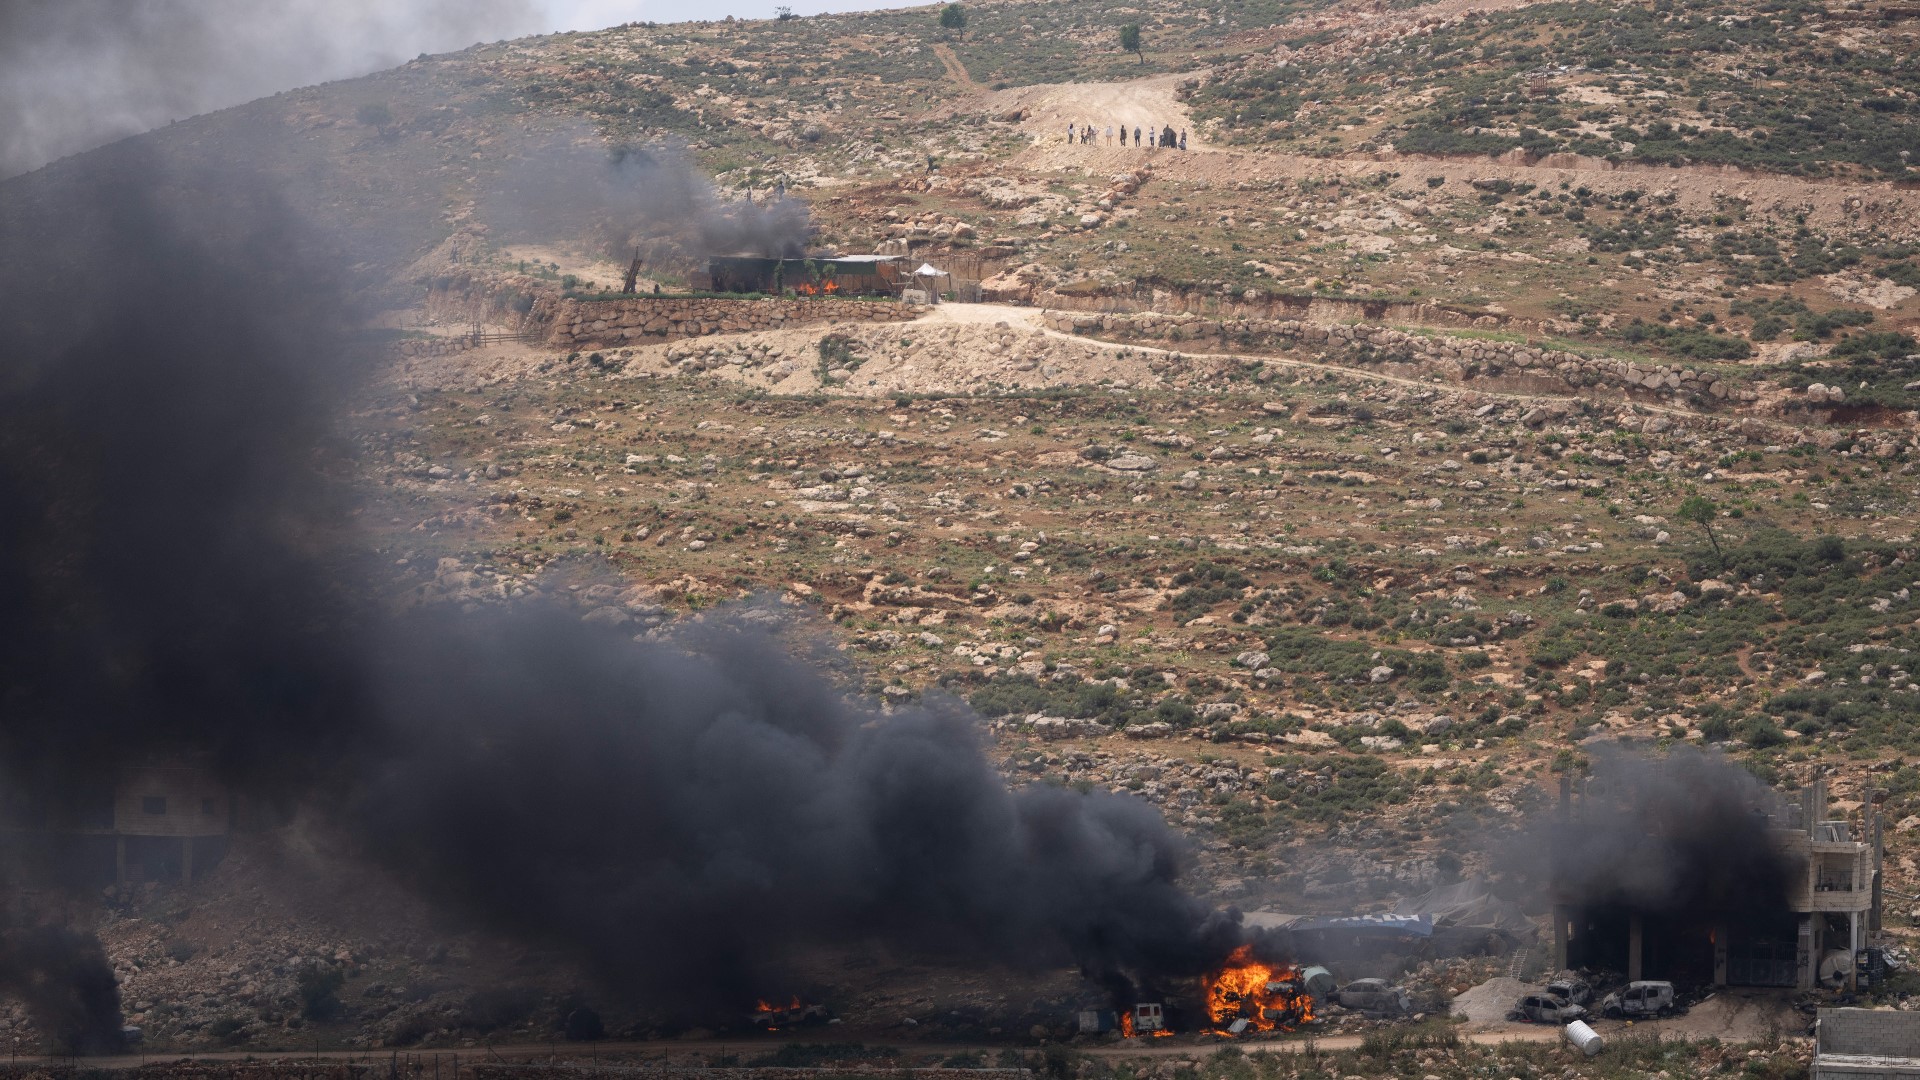 The Israeli military says dozens of people were injured in confrontations in several locations.